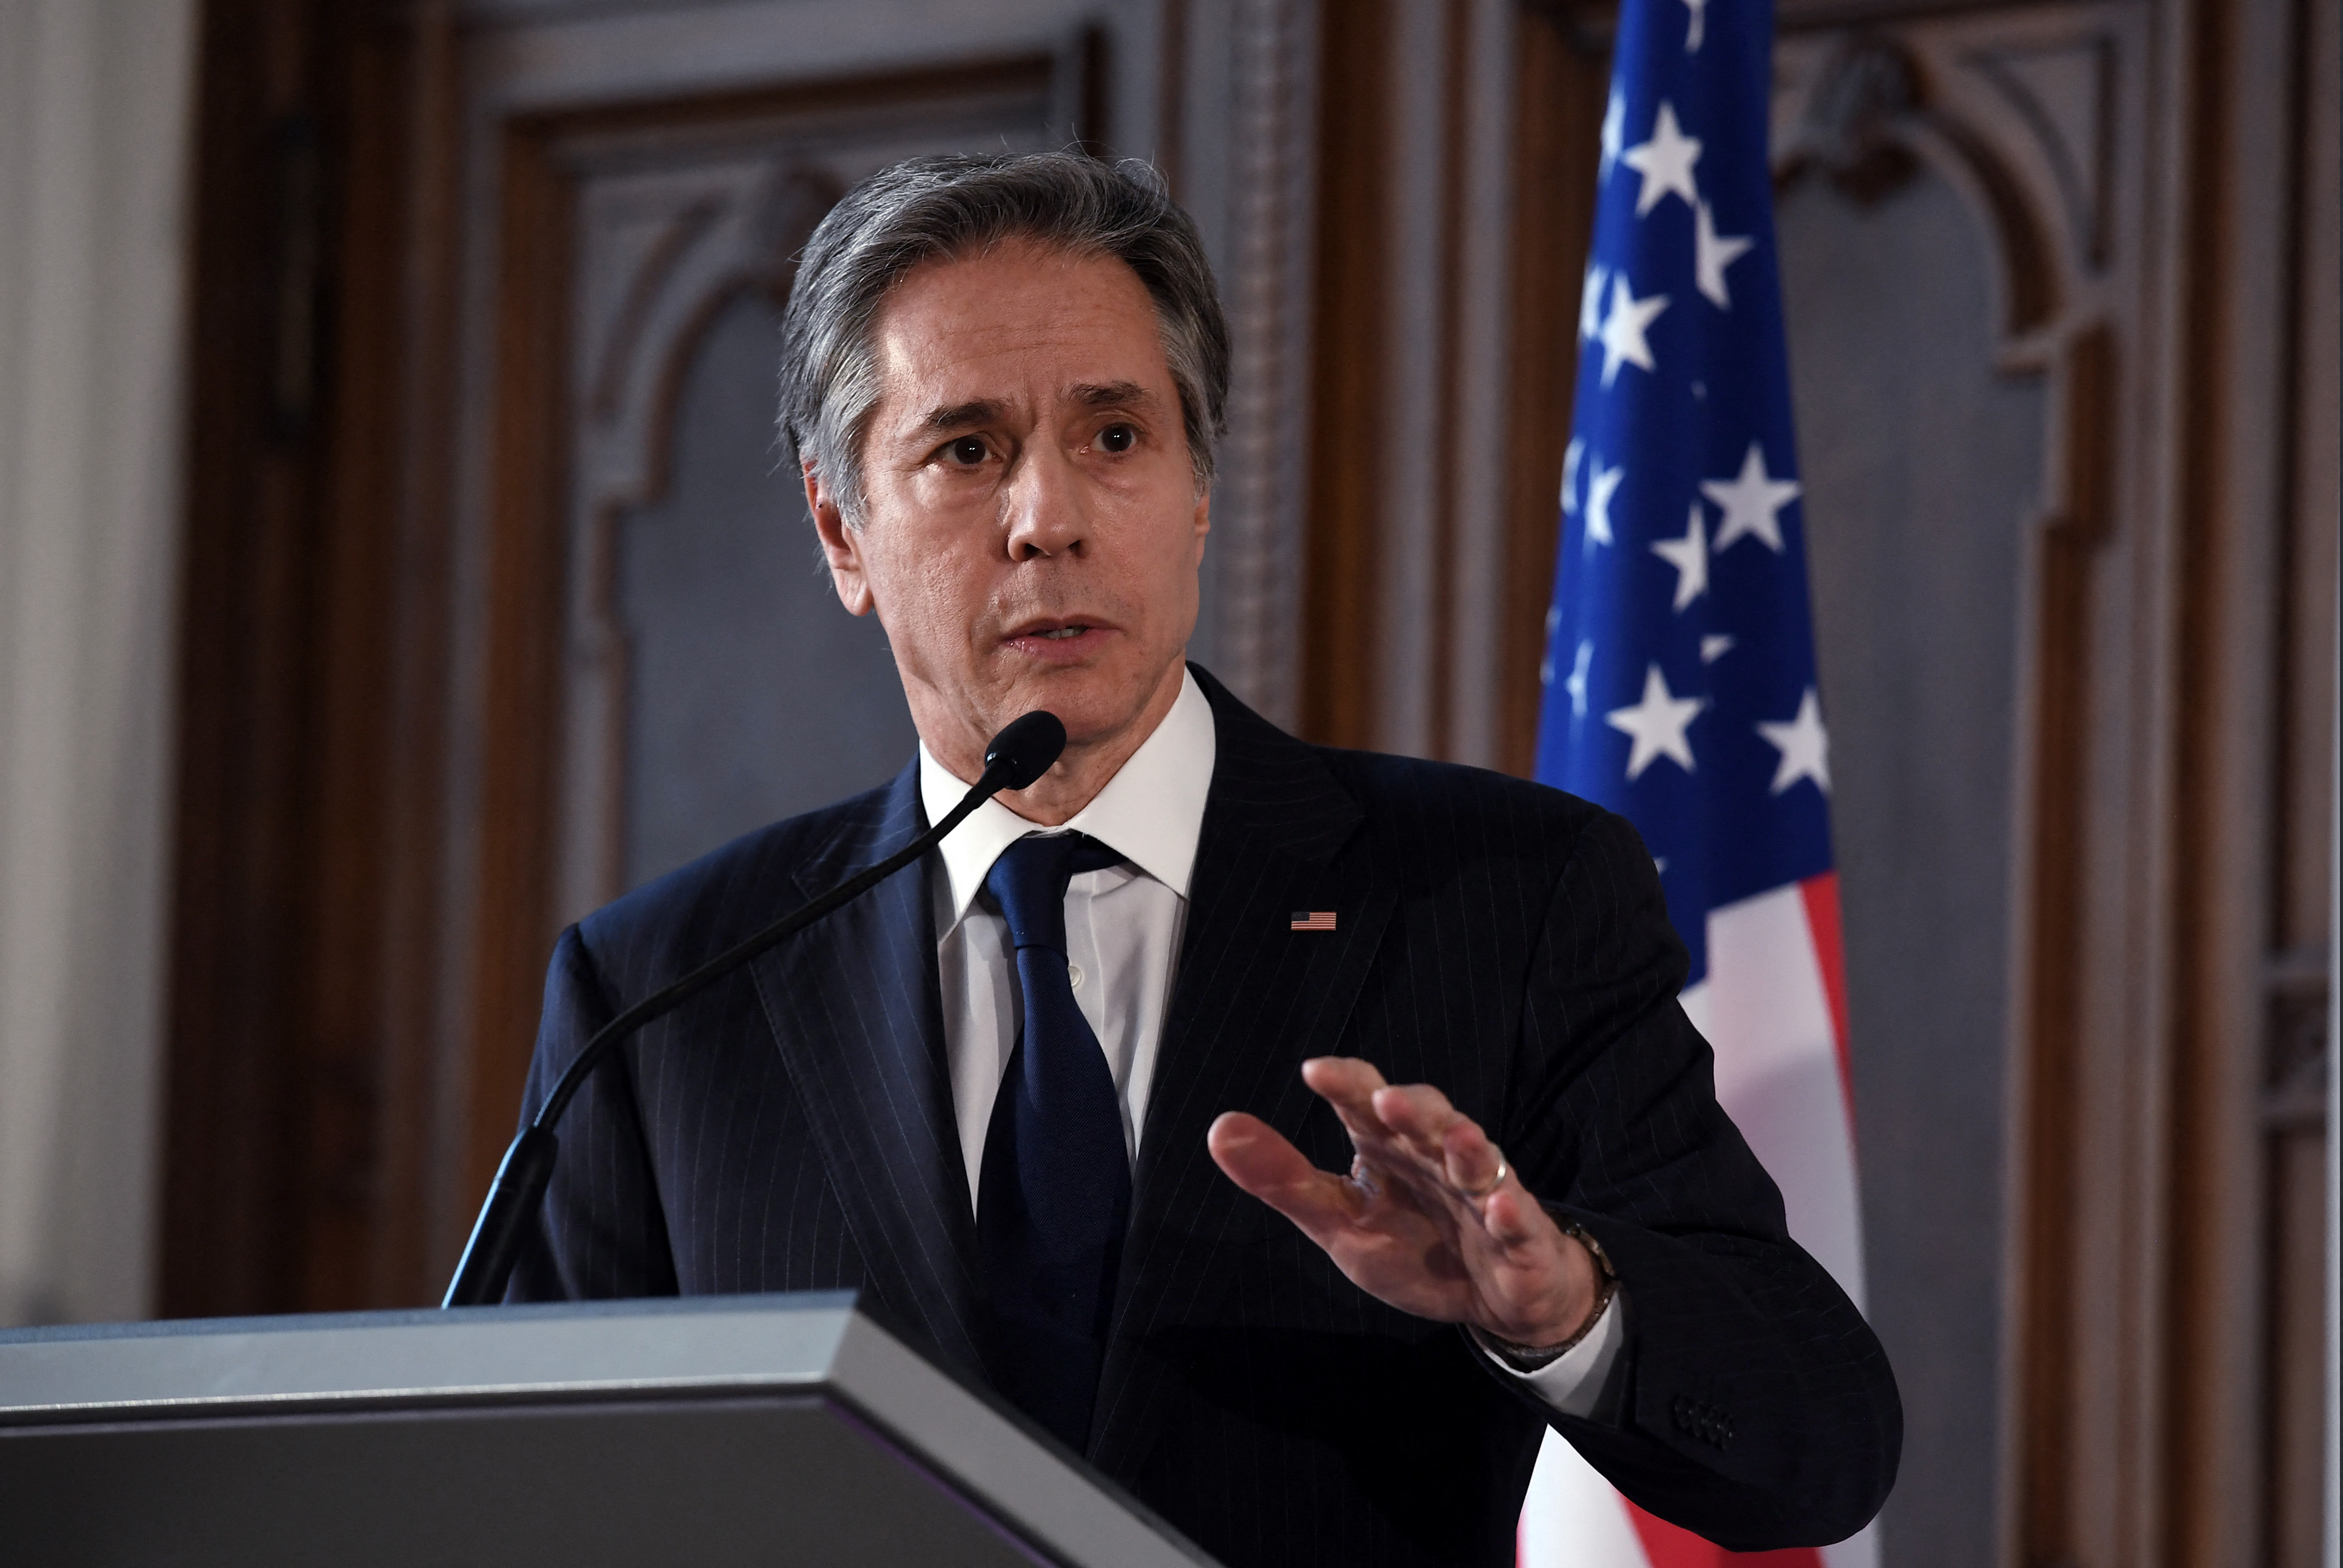 US Secretary of State Antony Blinken speaks during a press conference at the Latvian National Museum of Art in Riga, Latvia, on March 7.